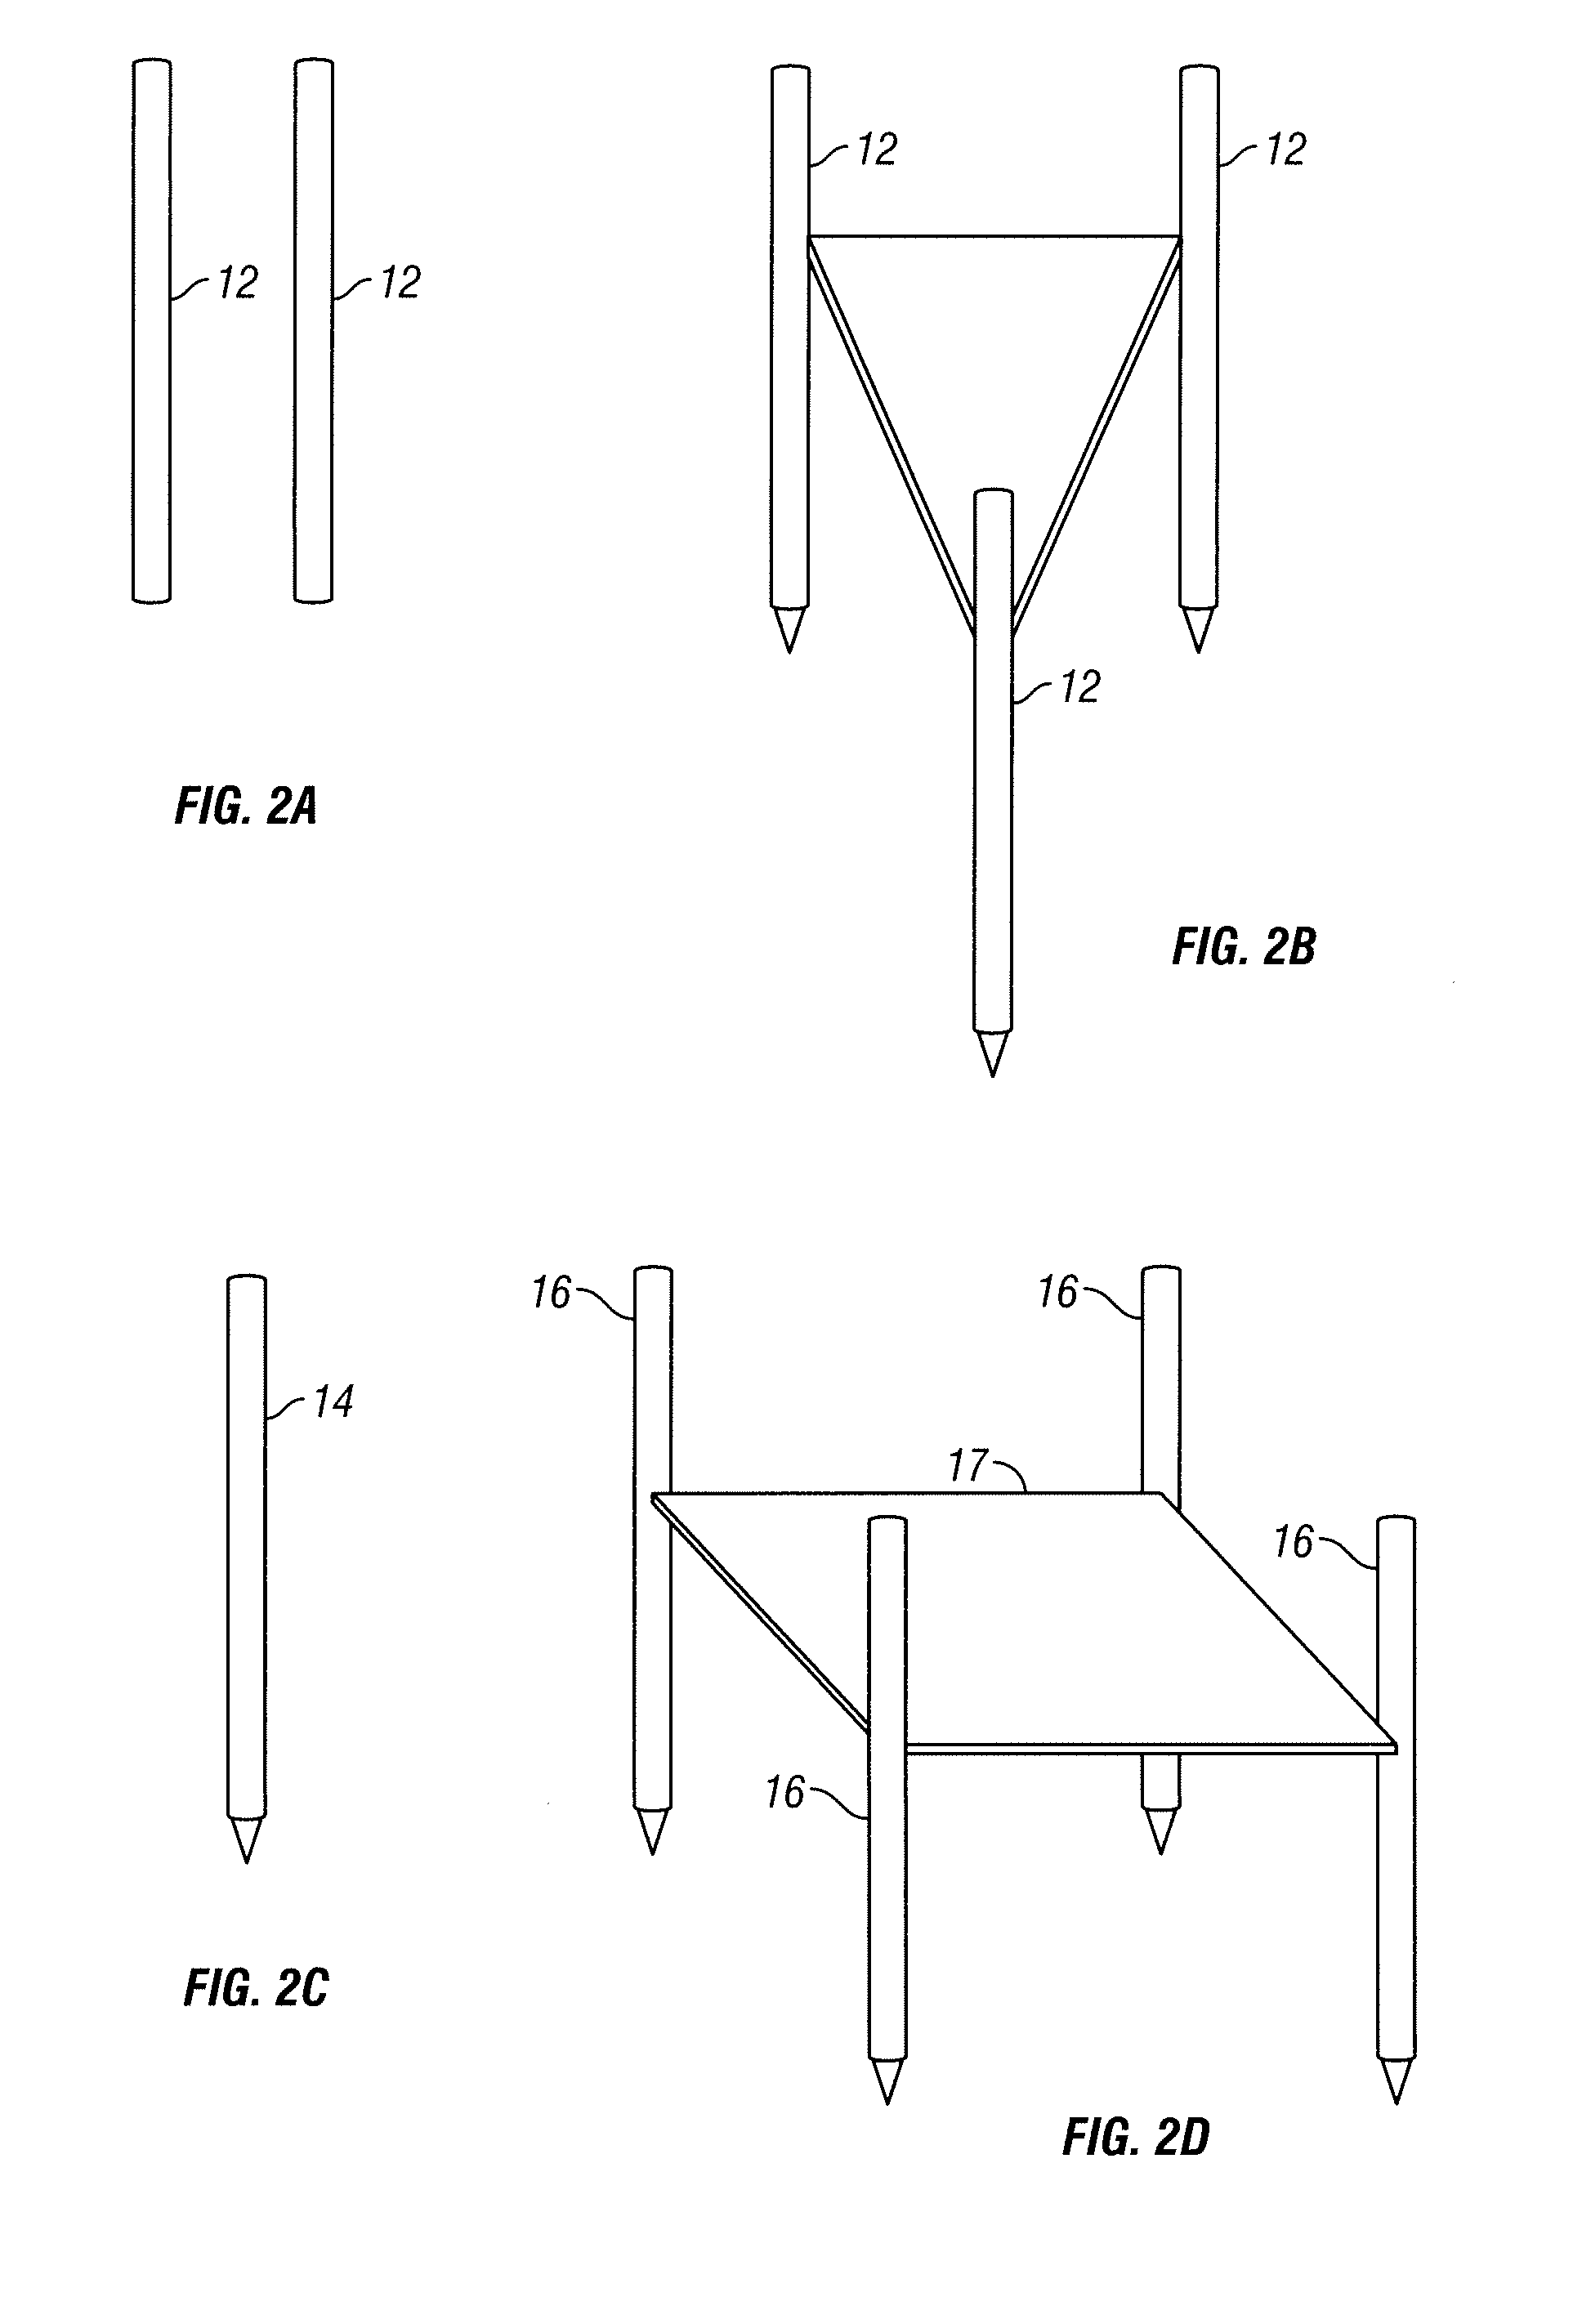 Systems for treating tissue sites using electroporation